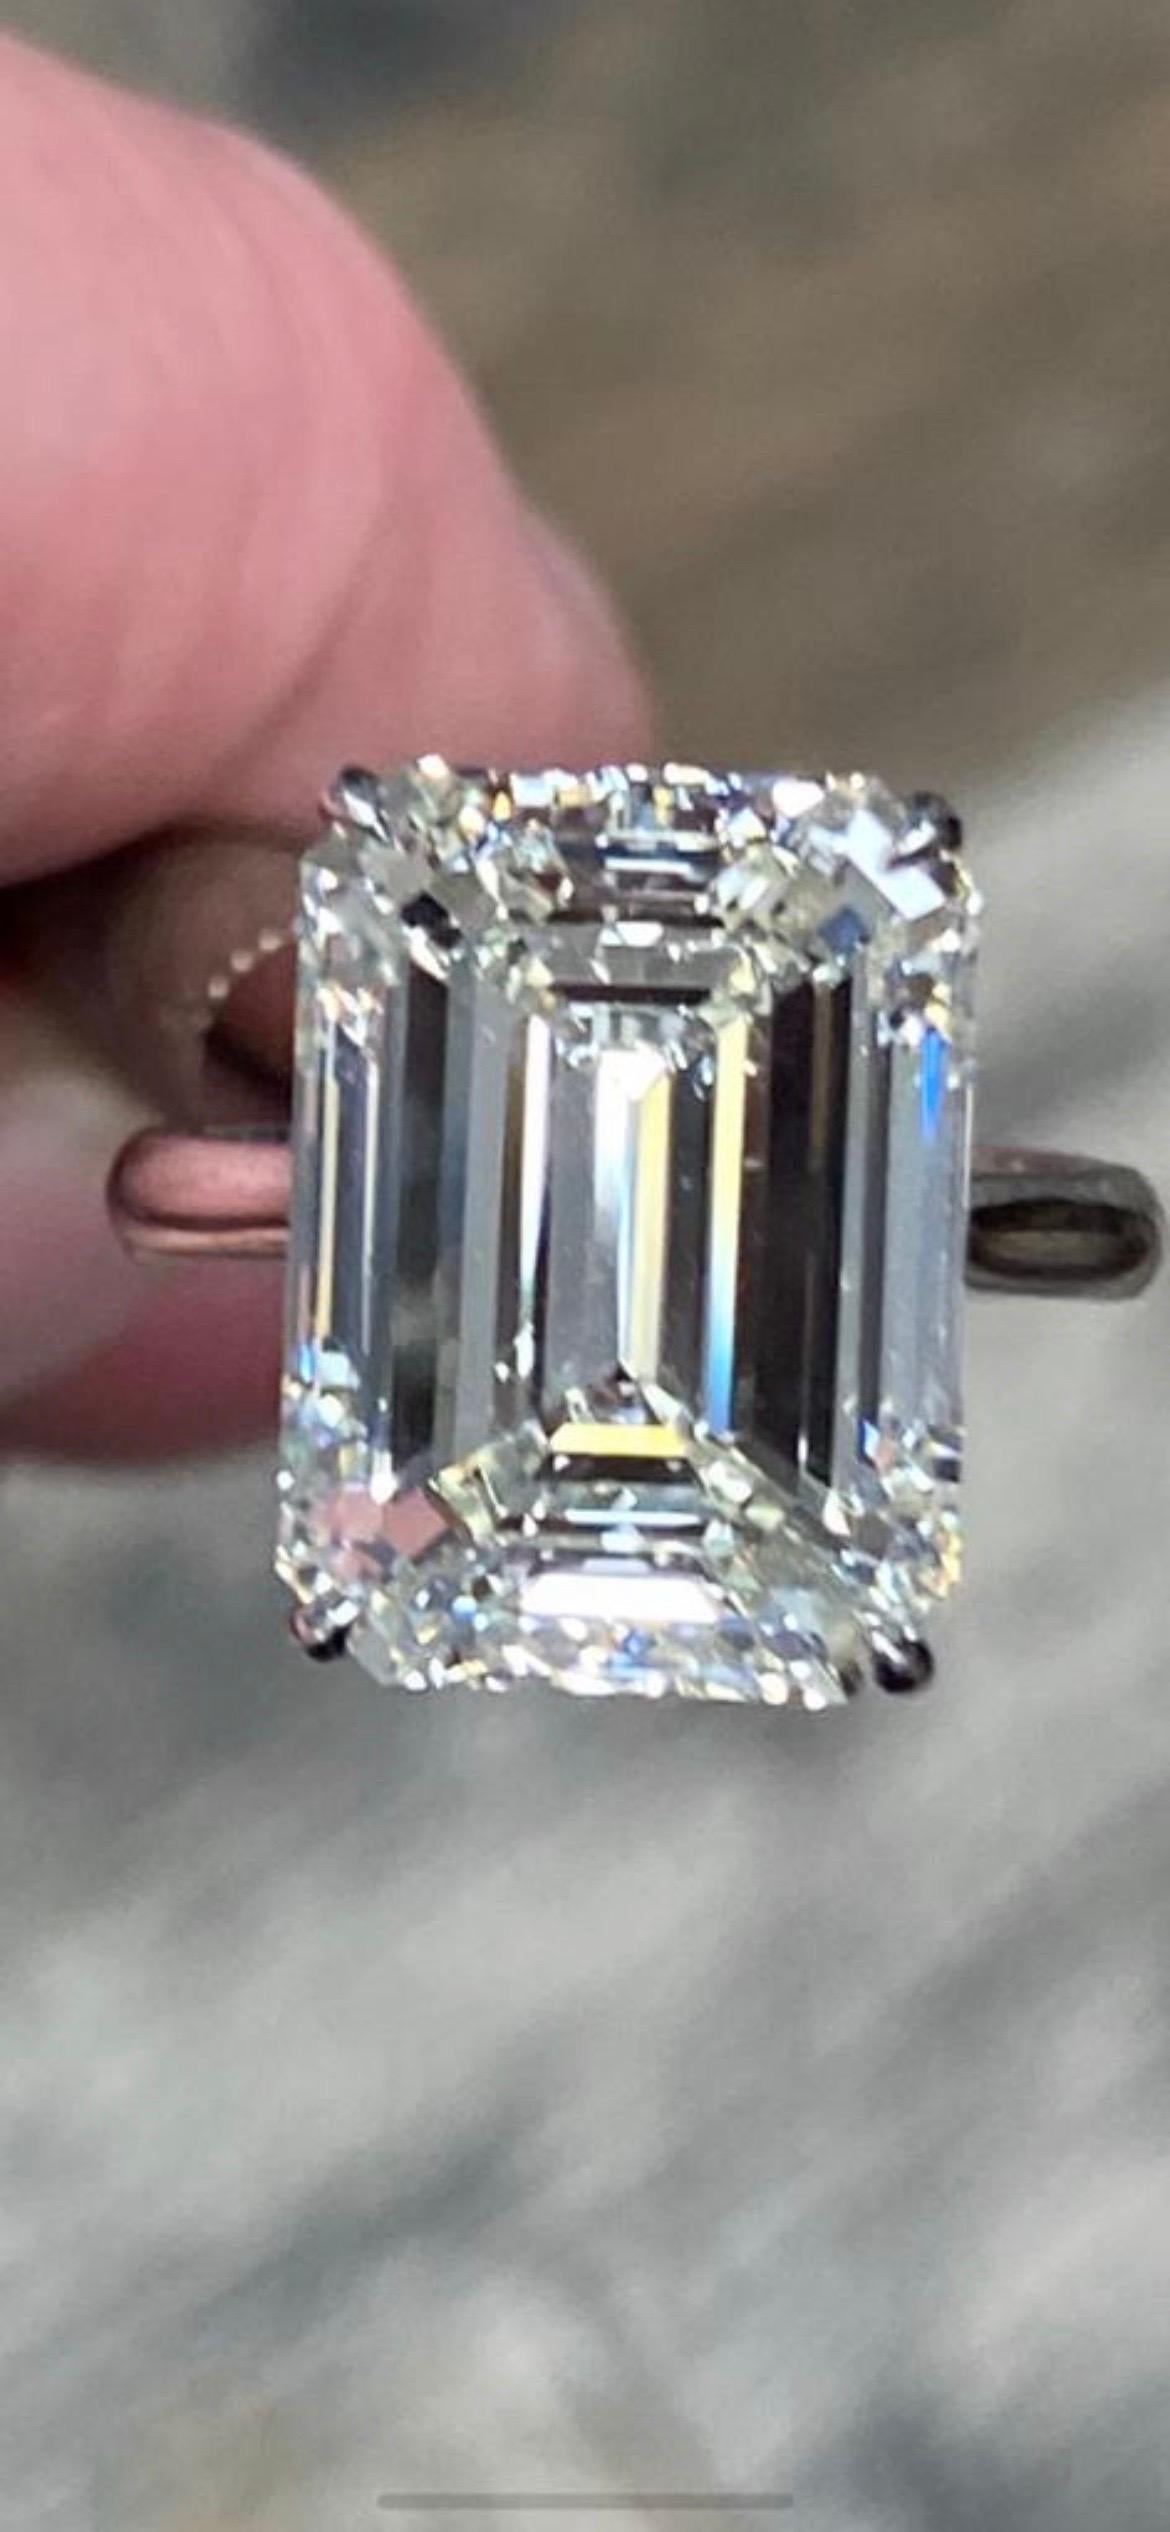 GIA CERTIFIED 12 CARAT EMERALD CUT DIAMOND RING 
Magnificent 12.27 Carat Emerald cut diamond ring.
“The Magic is in the Cut “
Truly a masterpiece and example of old world diamond cutting and shaping!
This beautifully cut gem is exceptional in its